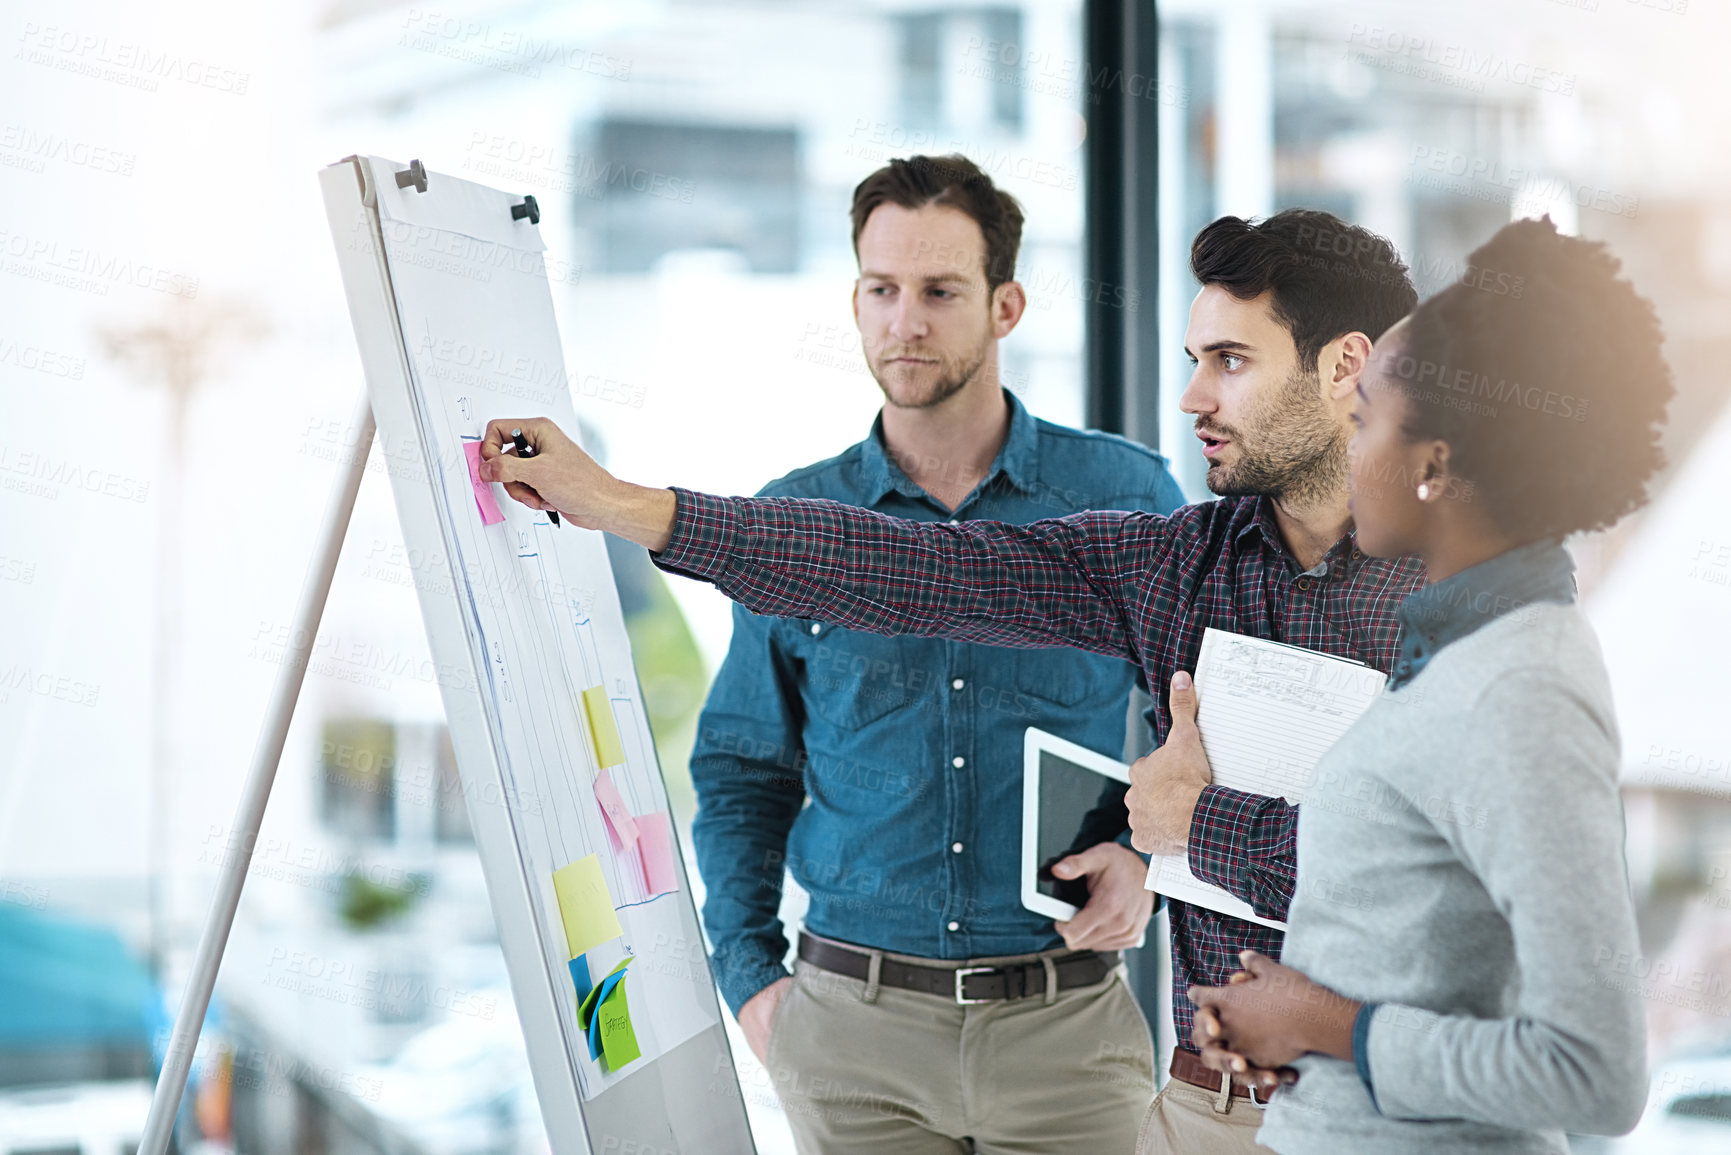 Buy stock photo Cropped shot of colleagues having a discussion using a whiteboard in an office